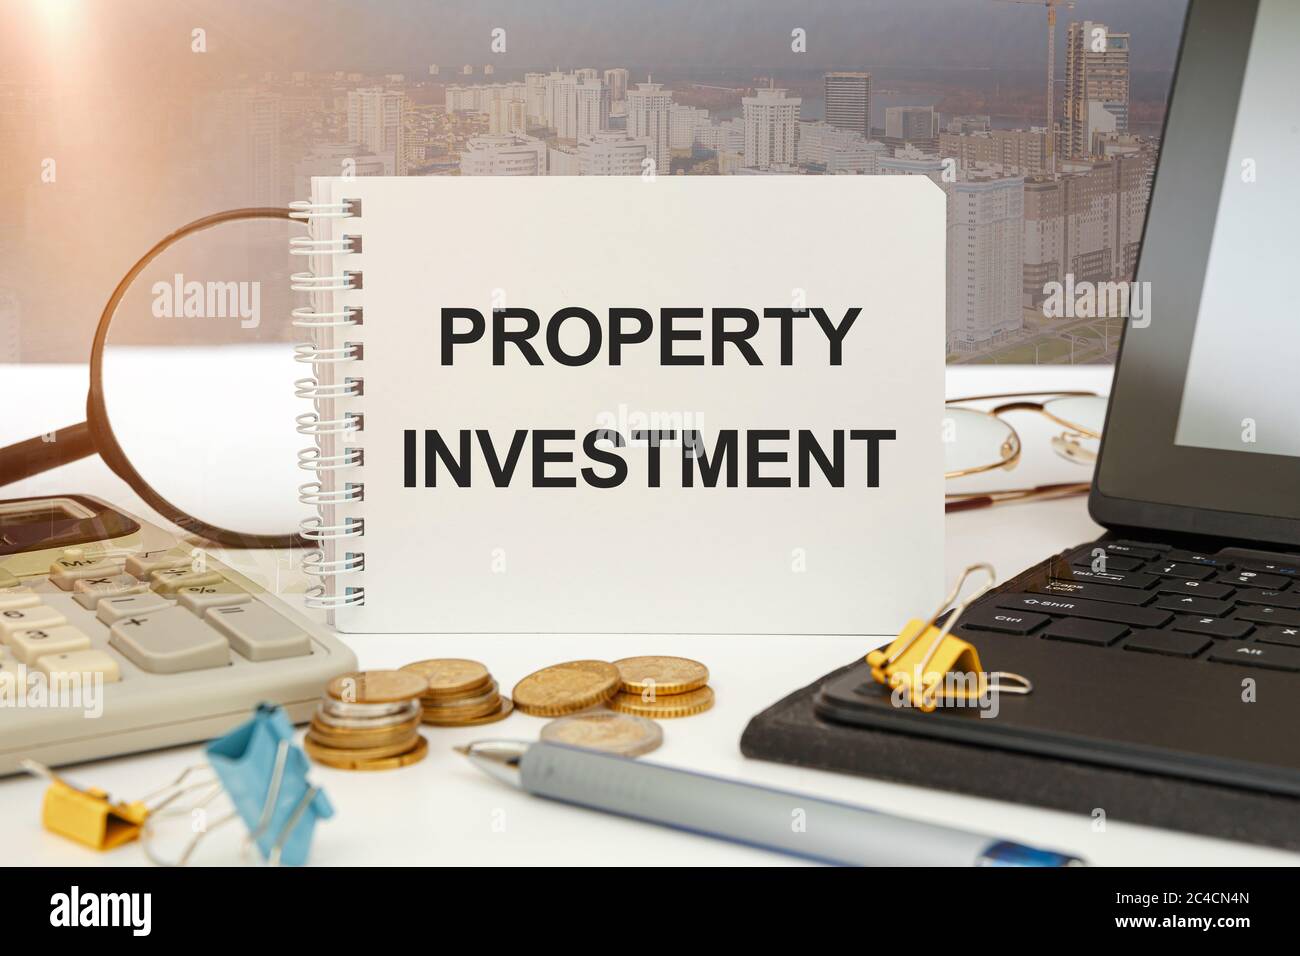 Workspace office desk and notebook writing Property Investment. Business property concept. Stock Photo